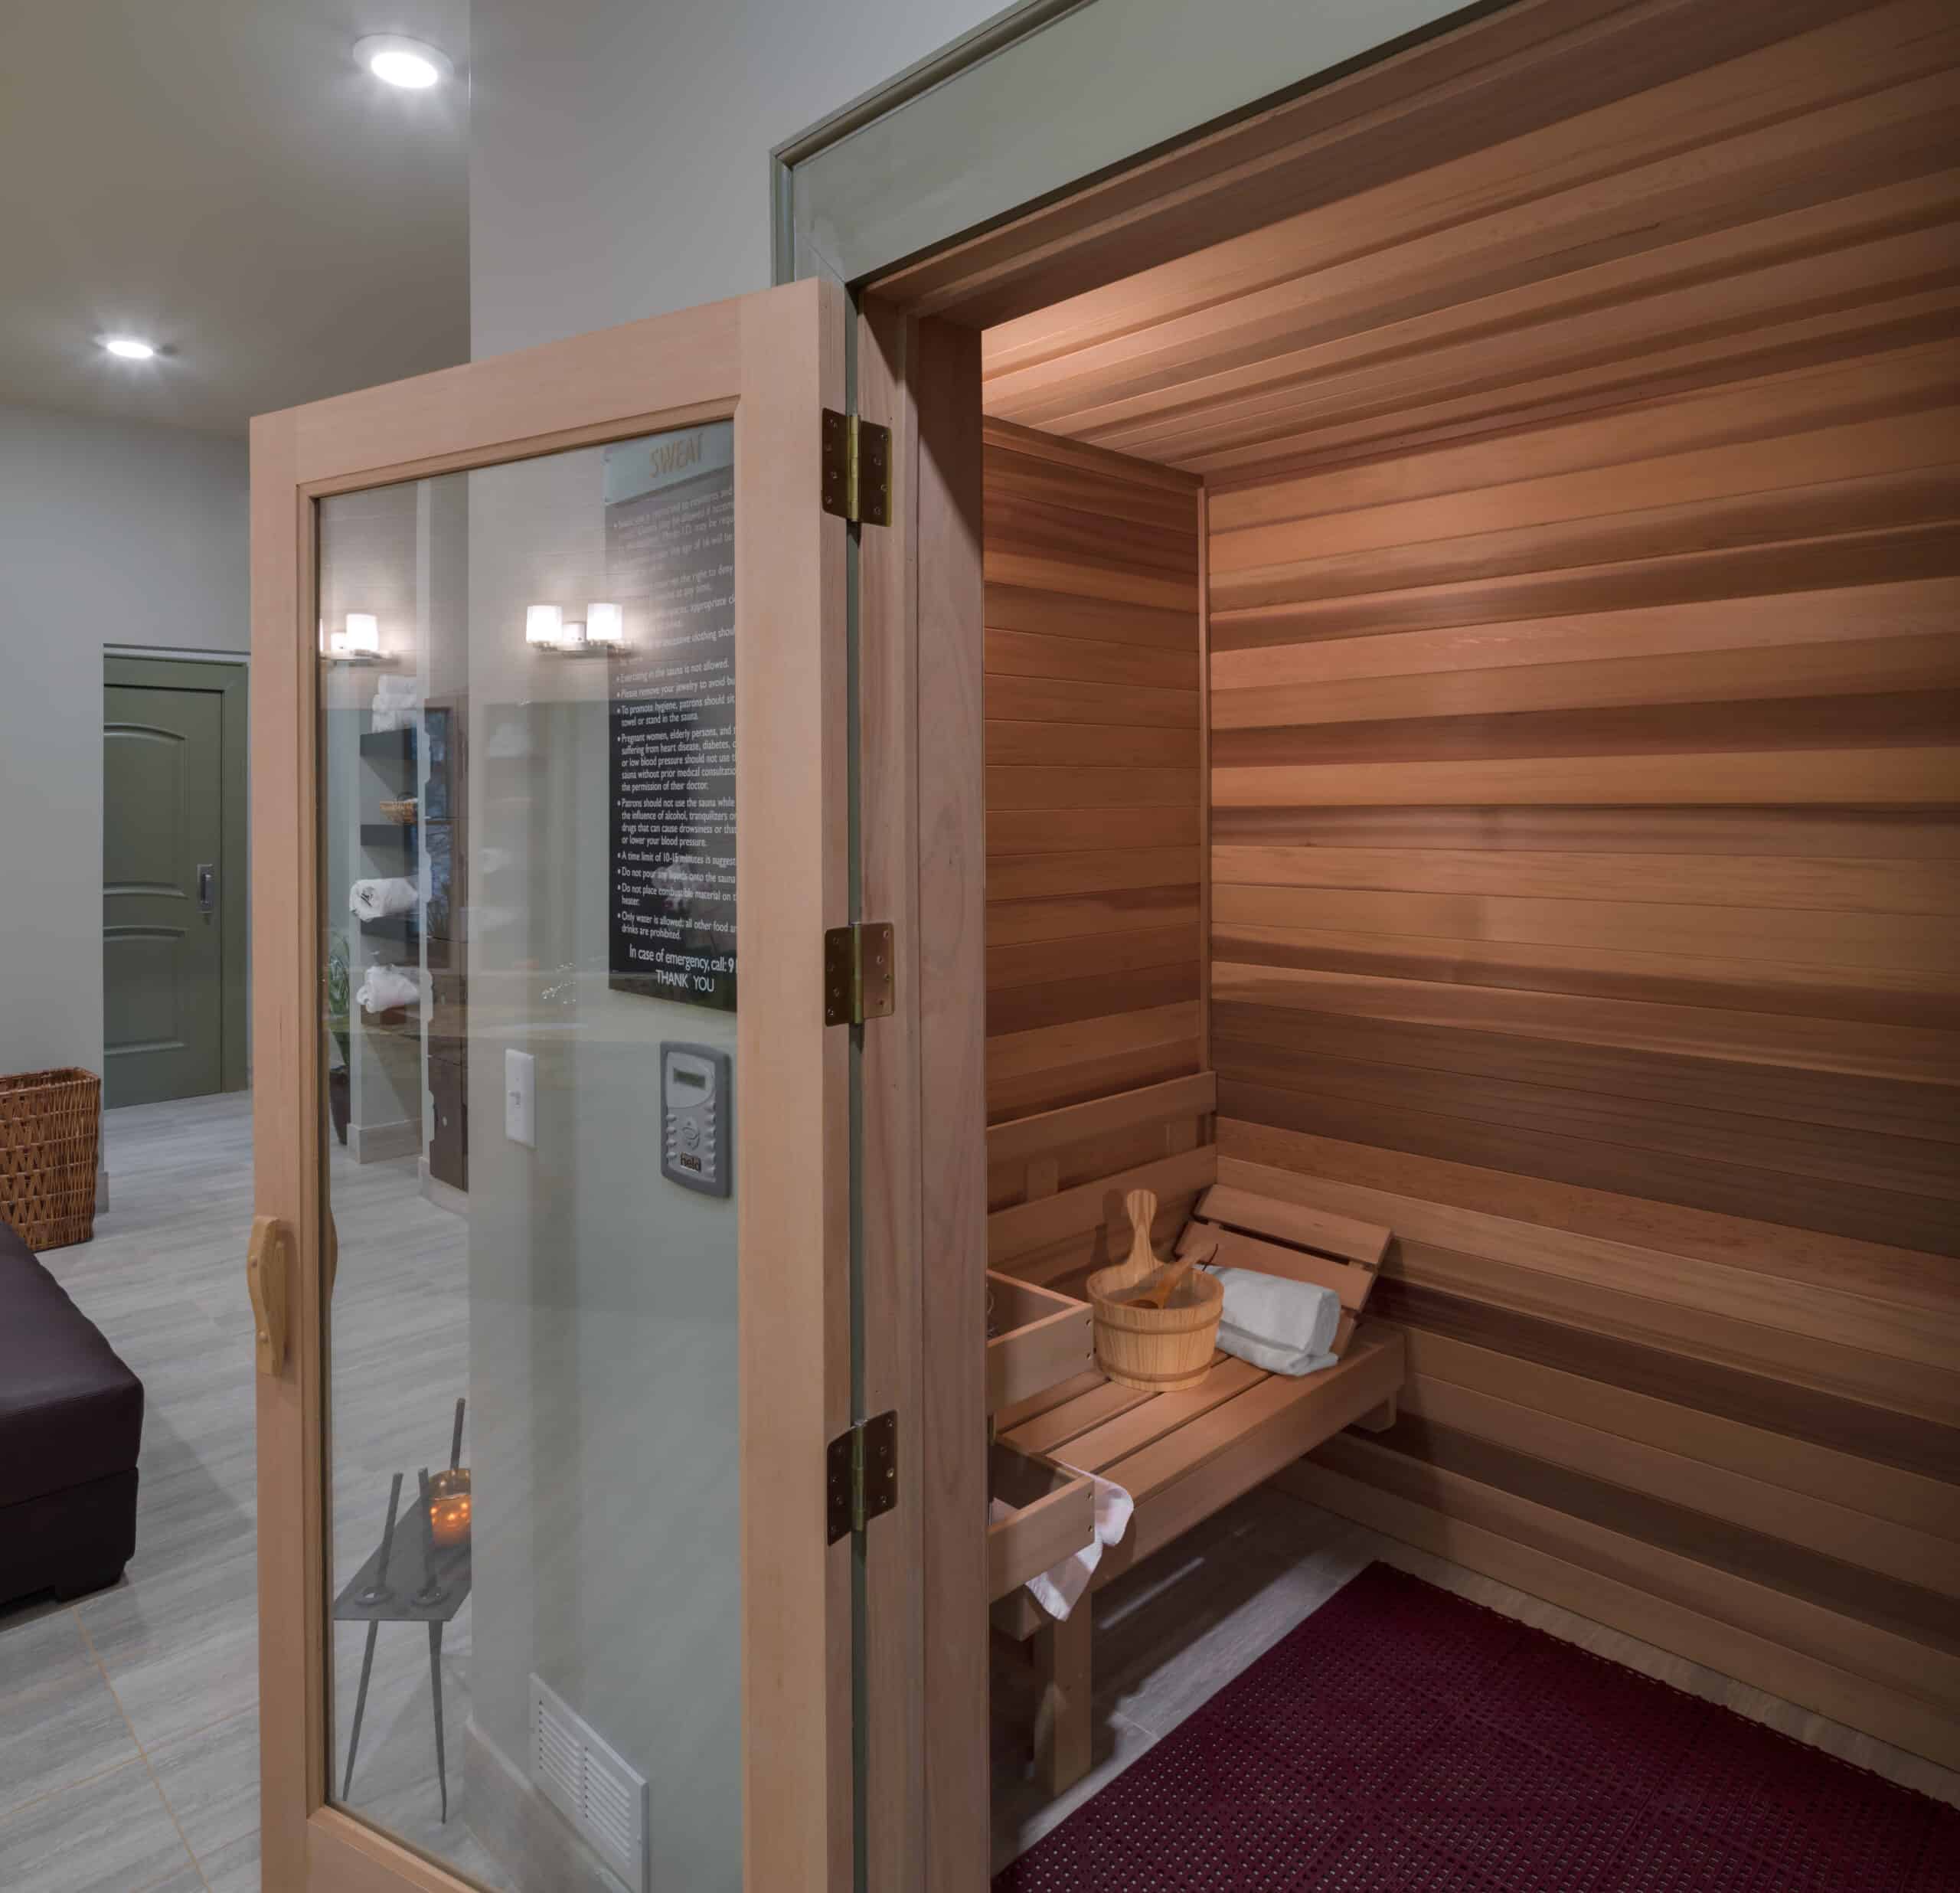 A room with a sauna and a wooden bench.